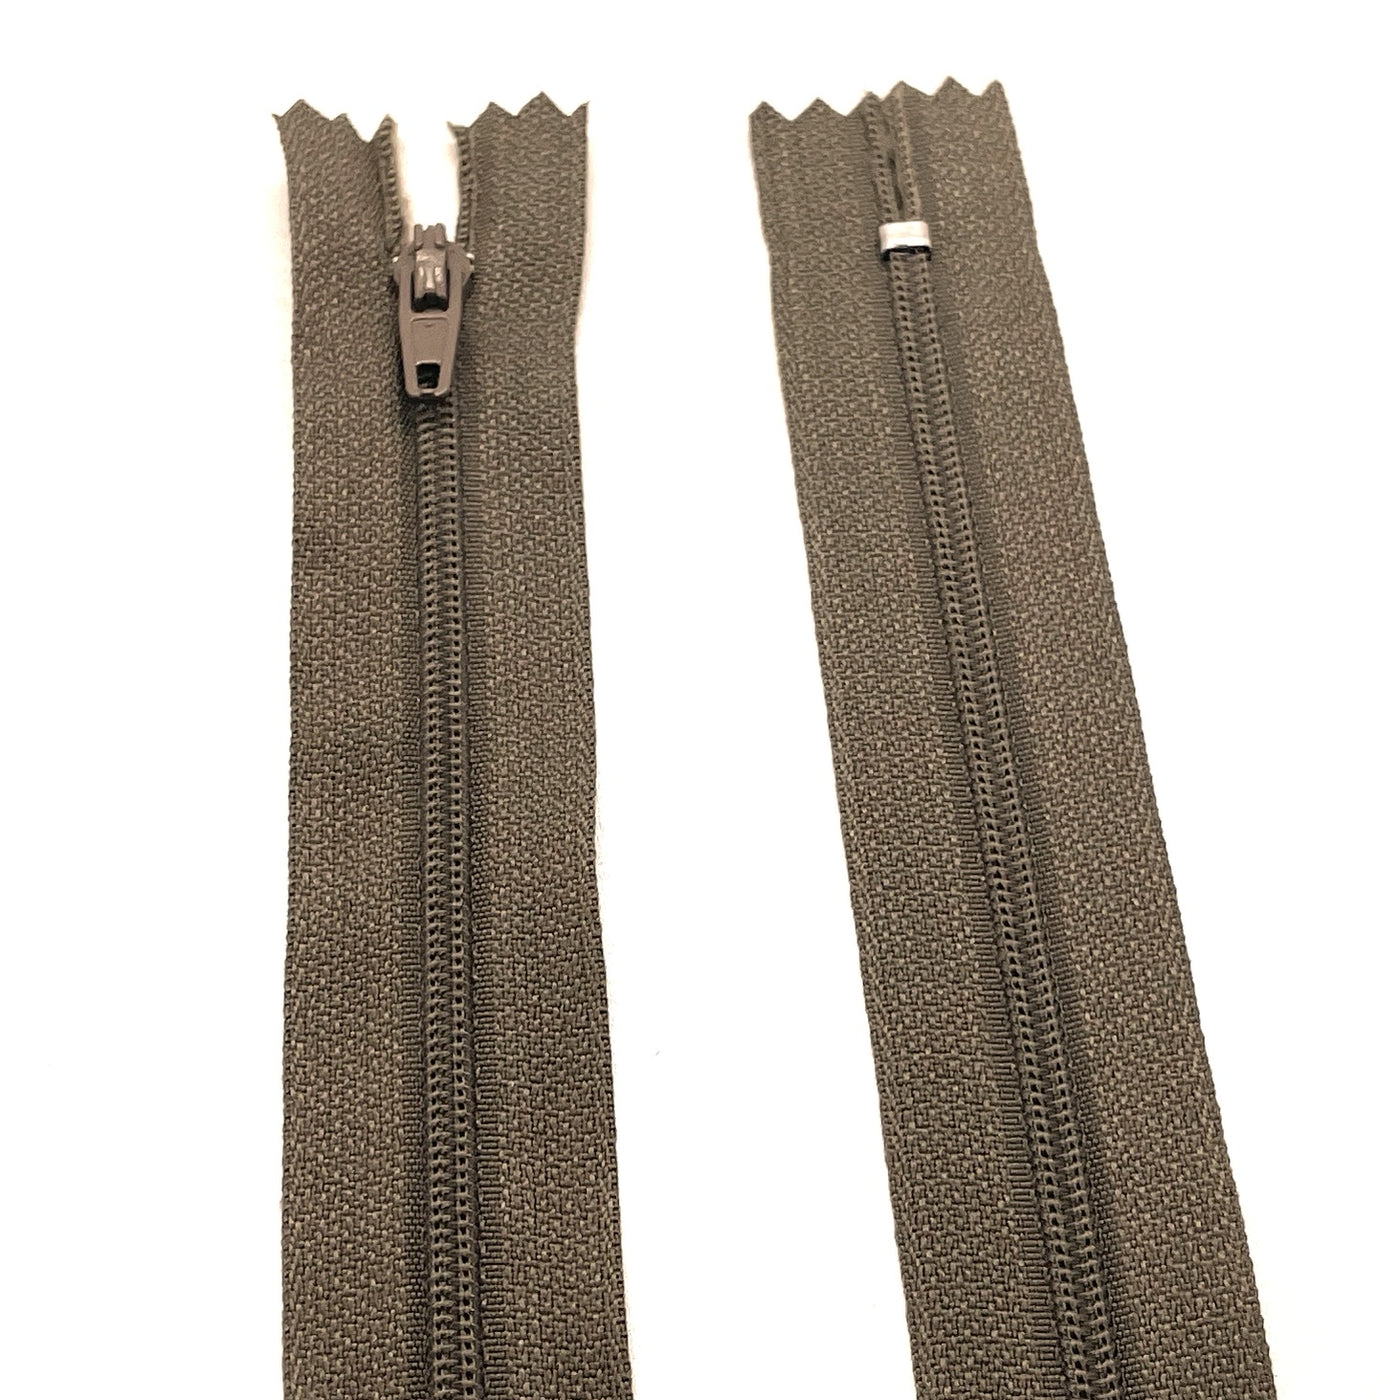 Photo of olive brown nylon zips available in 25 colors and 5 sizes. Excellent quality zippers for craft and dressmaking purposes. Perfect for dresses, skirts, trousers, bags, purses, cushions, and numerous other projects. So many possibilities, so little time!